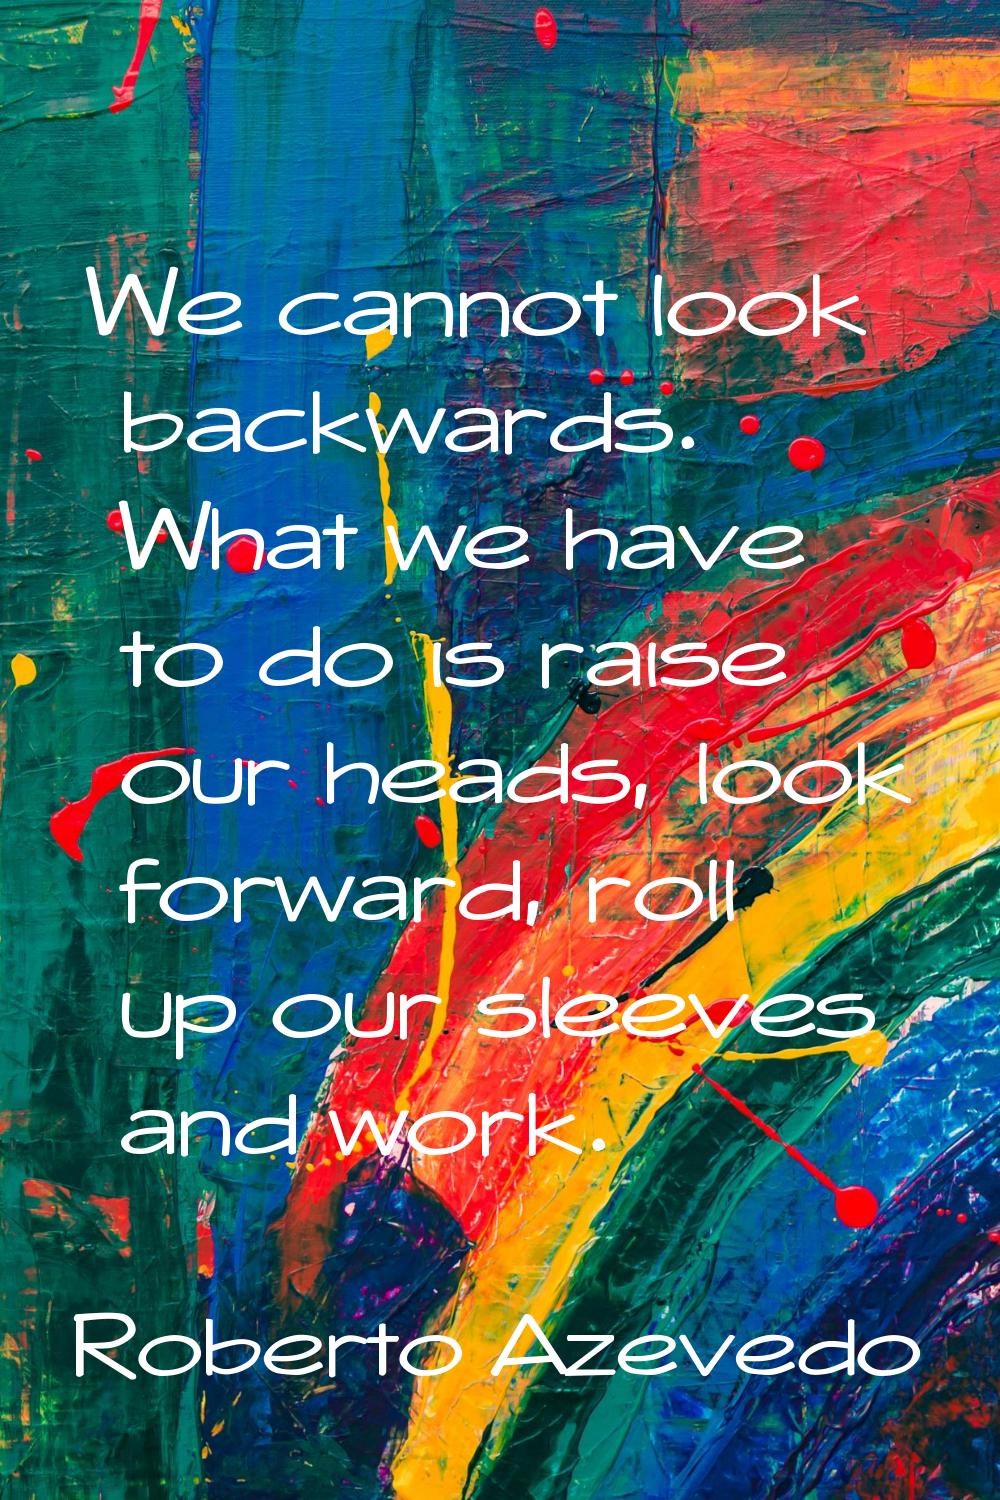 We cannot look backwards. What we have to do is raise our heads, look forward, roll up our sleeves 